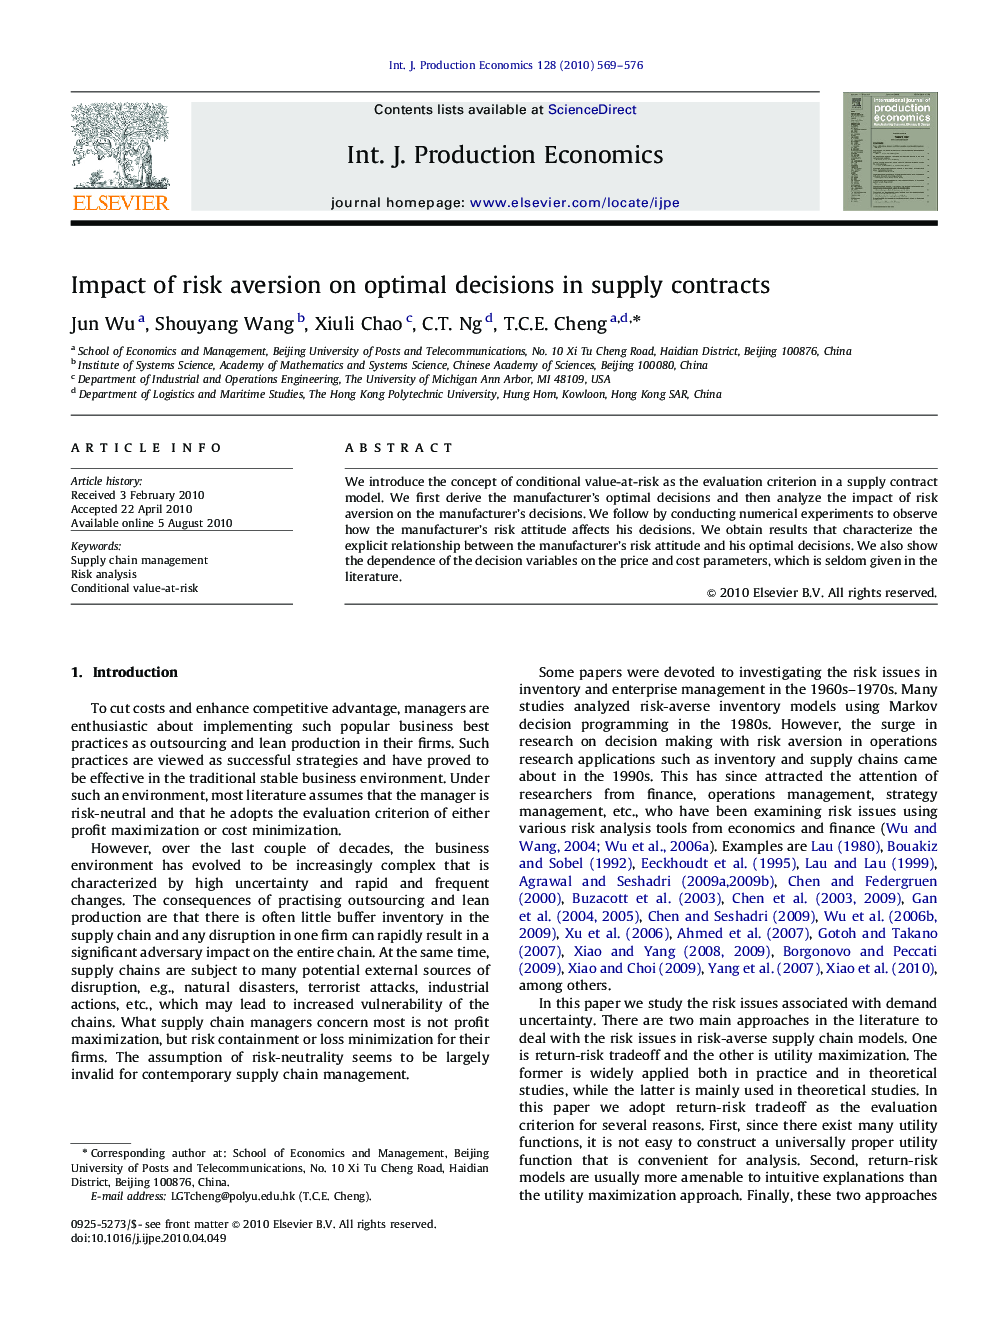 Impact of risk aversion on optimal decisions in supply contracts